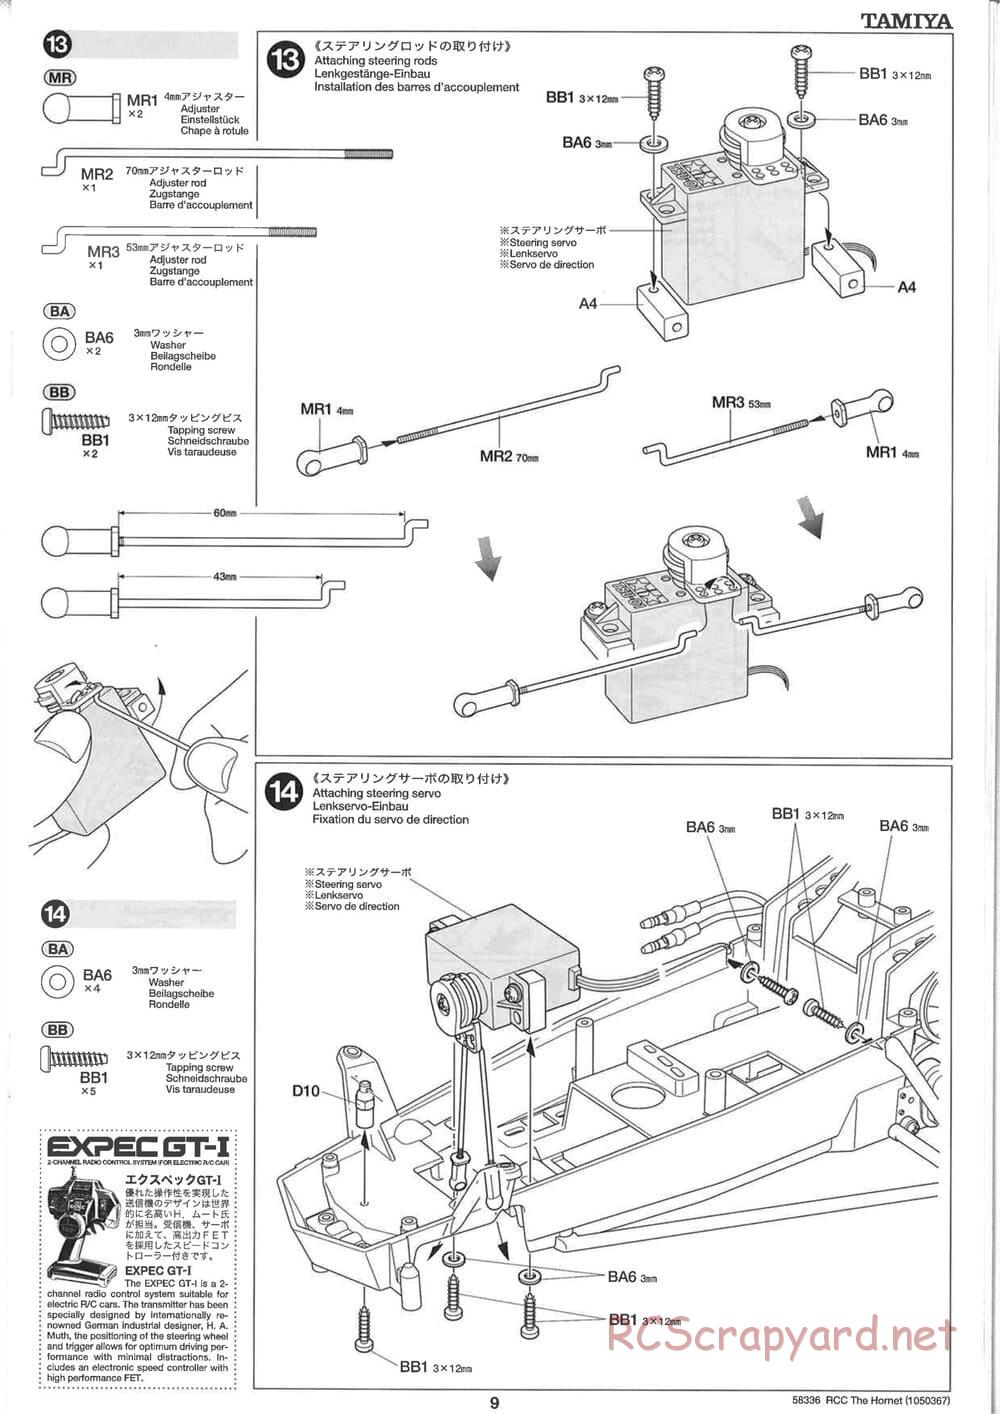 Tamiya - The Hornet (2004) - GH Chassis - Manual - Page 9